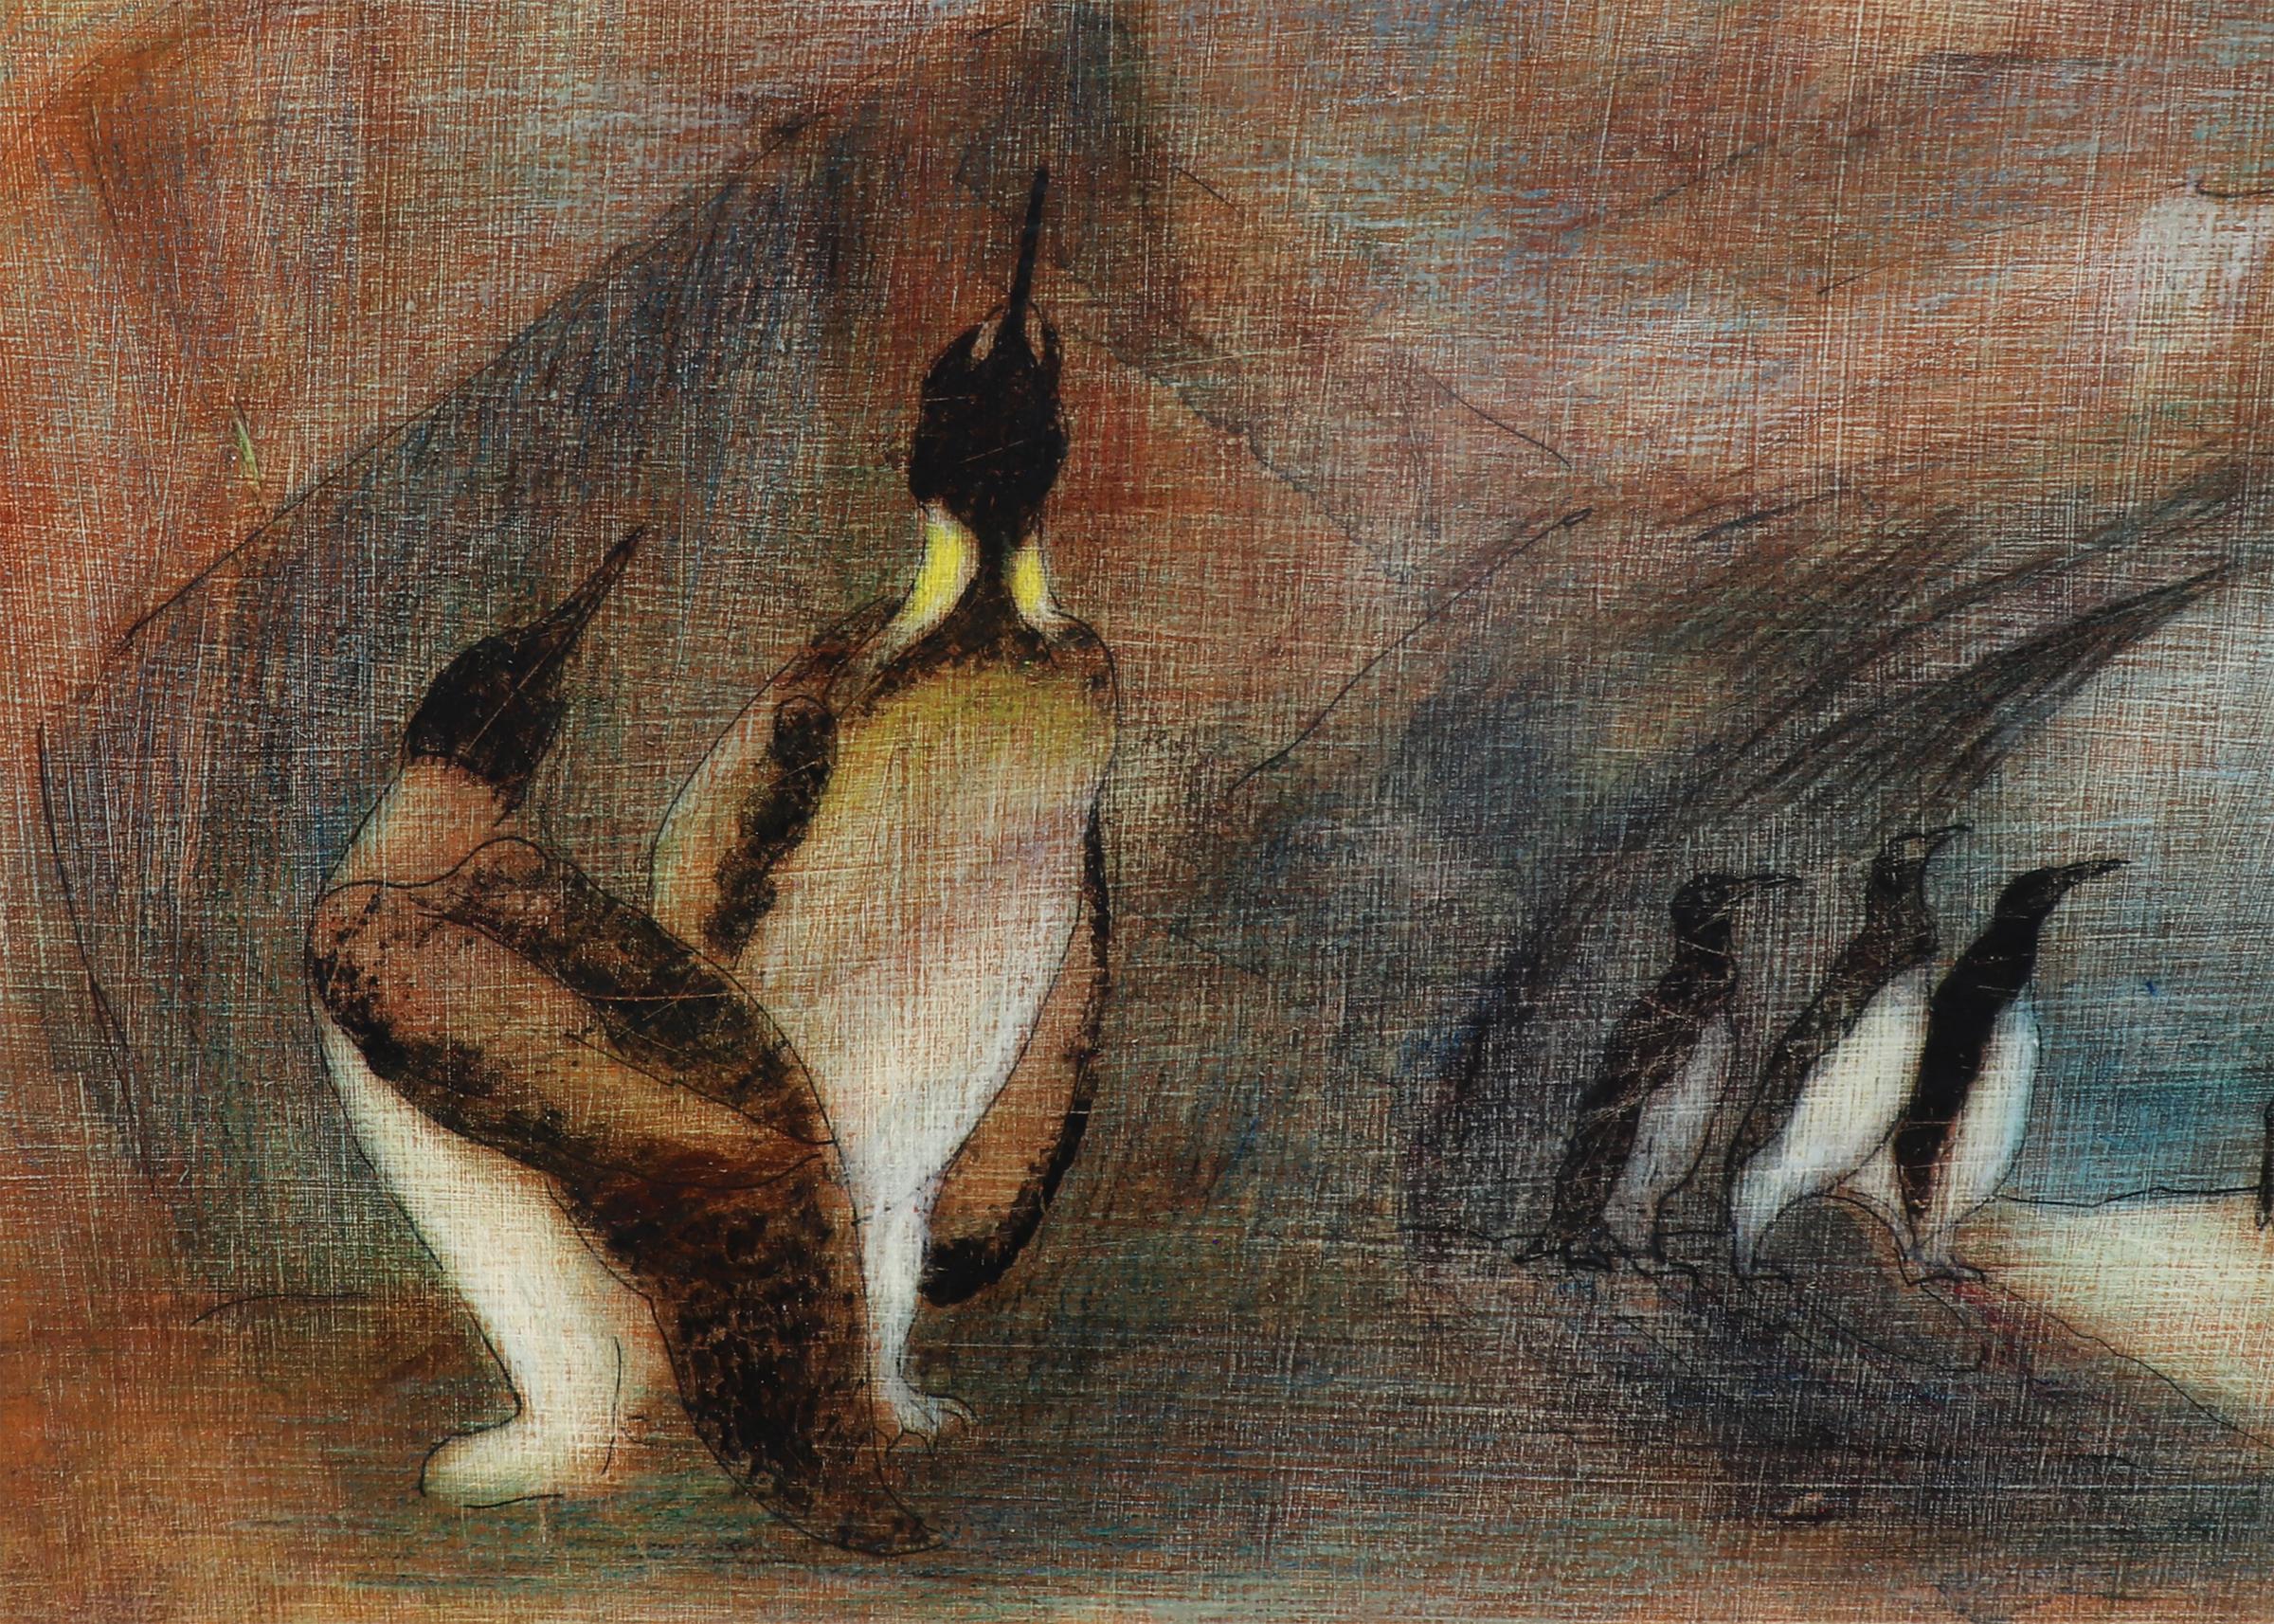 Americans Modernist Tempera Painting, Penguins in Snowy Landscape, Blue White - Brown Animal Painting by Archie Musick